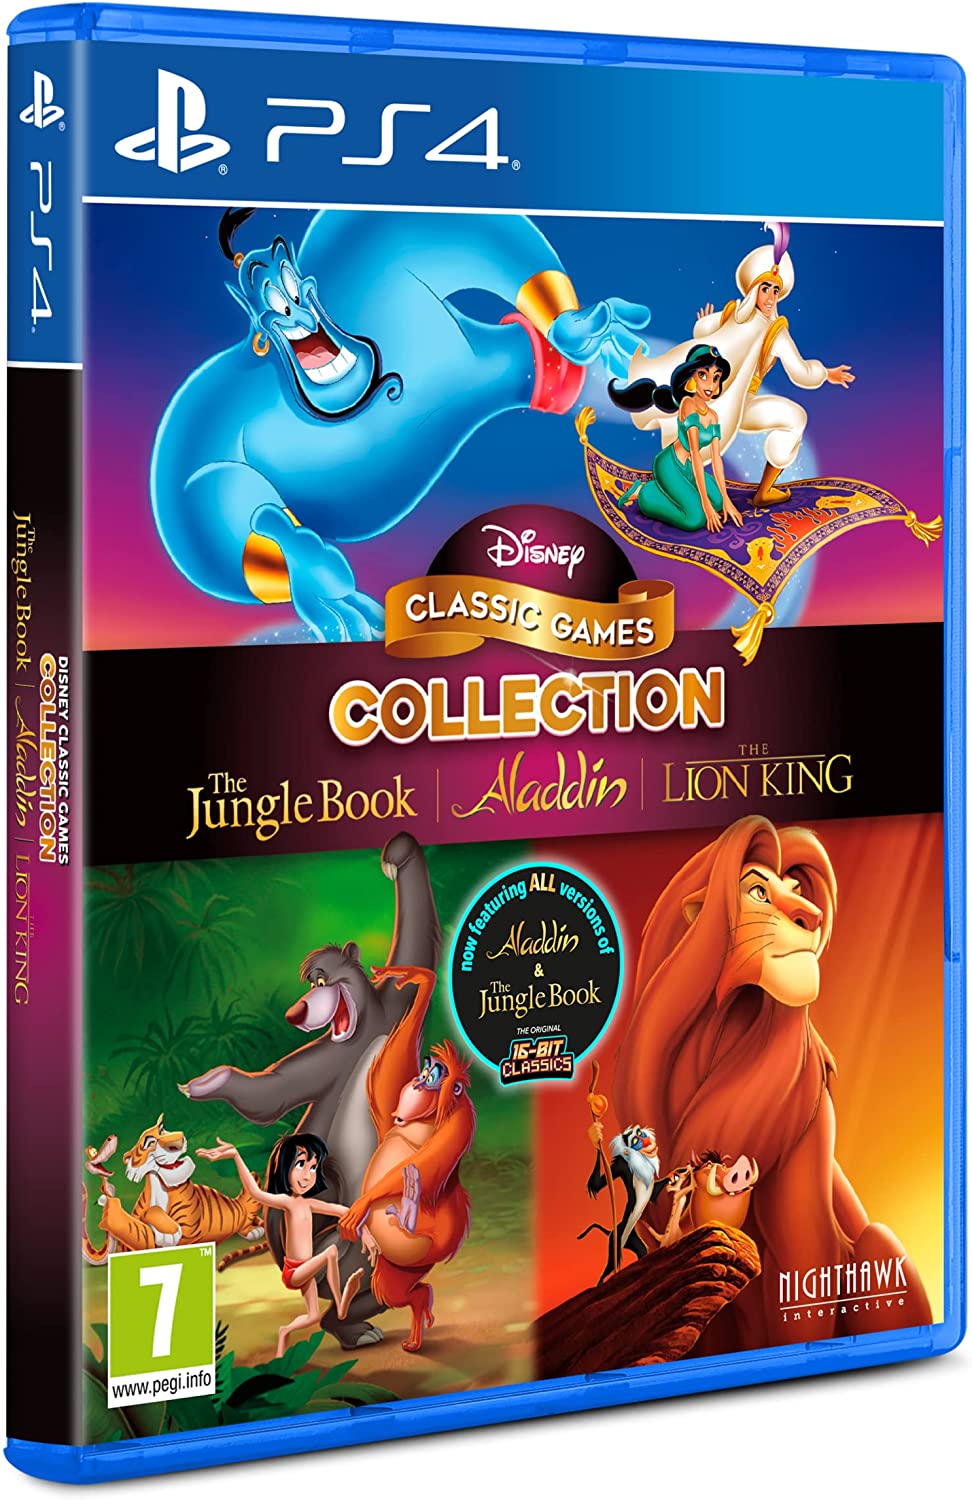 Disney Classic Games Collection: The Jungle Book, Aladdin, & The Lion King - PS4